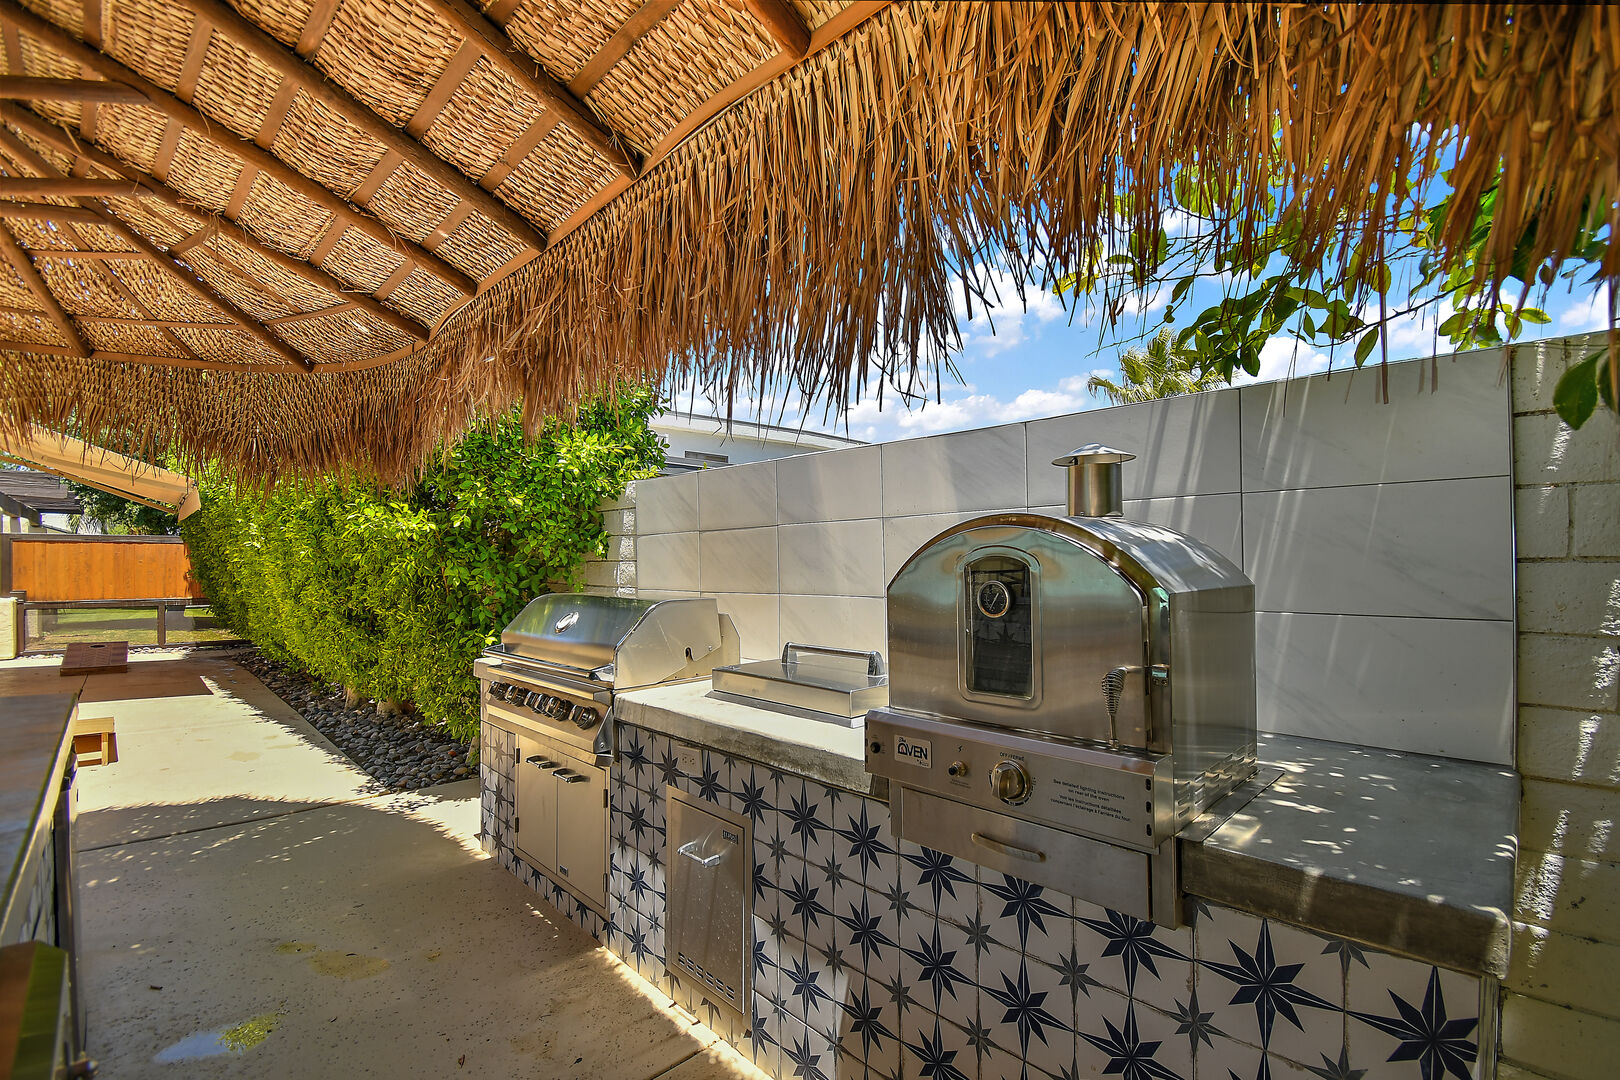 This awesome space is kept shaded under a Palapa covering with a switch controlled fan.